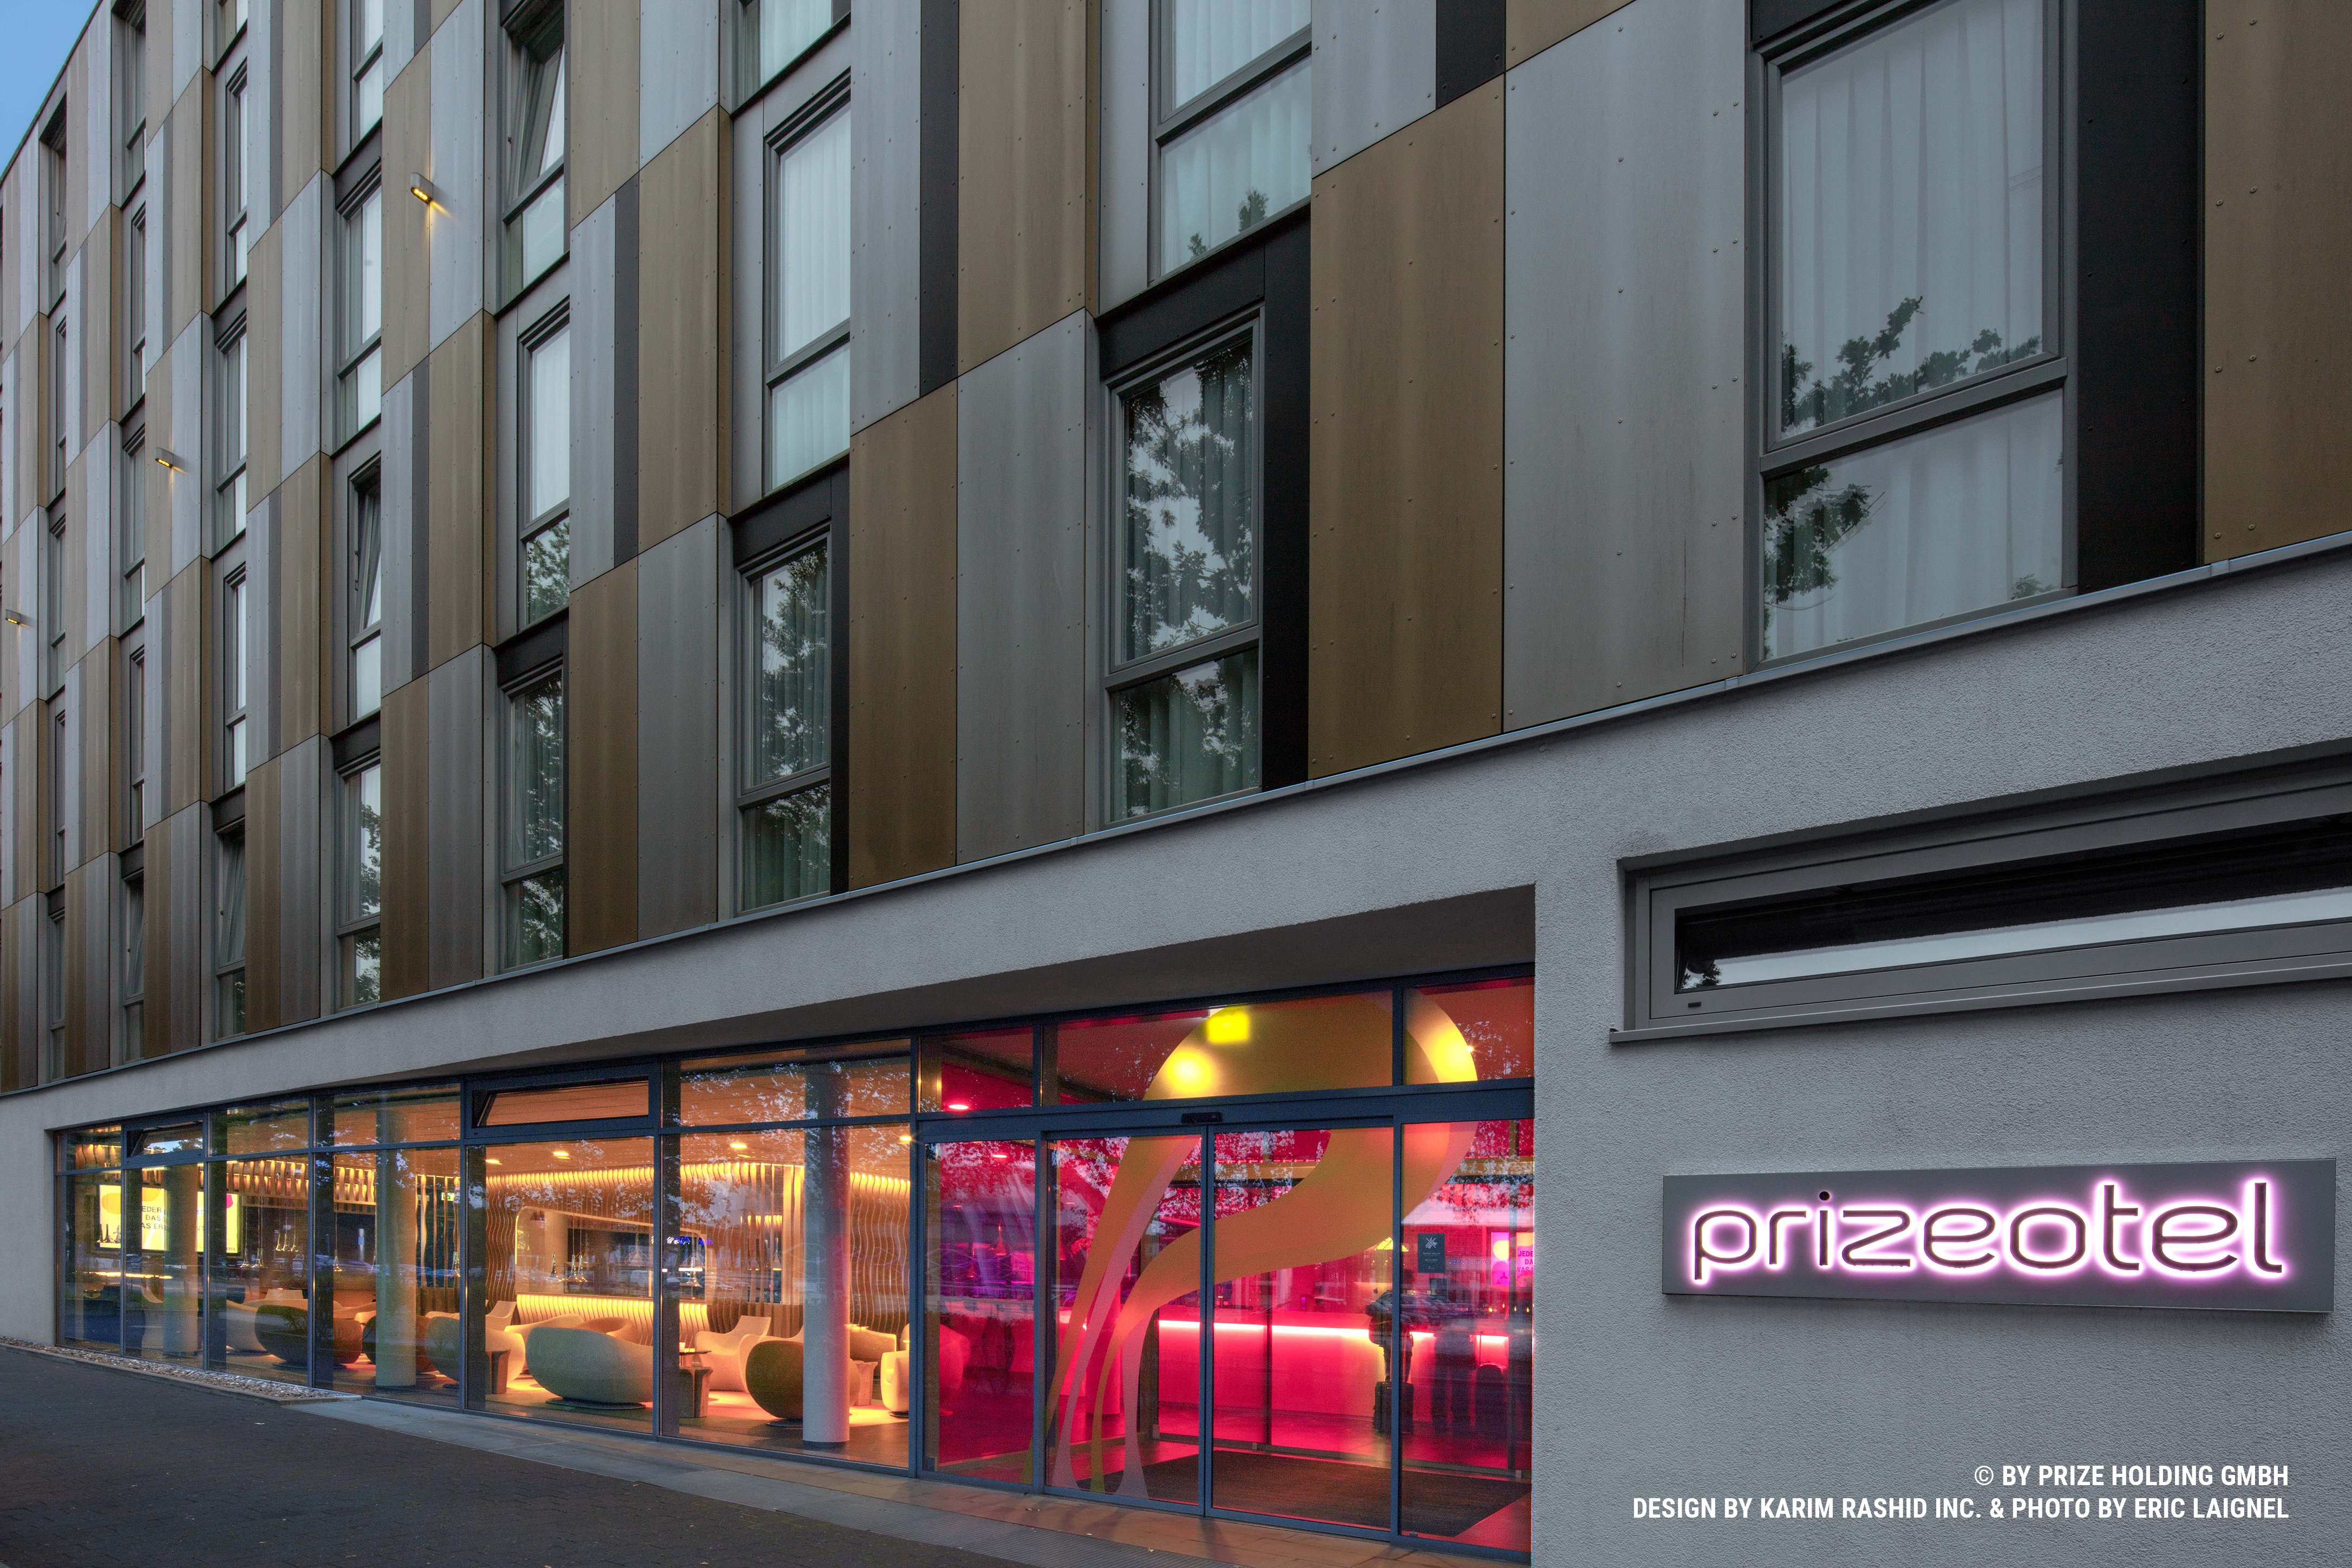 Facade of the prizeotel building Bremen-City with a pink LED logo